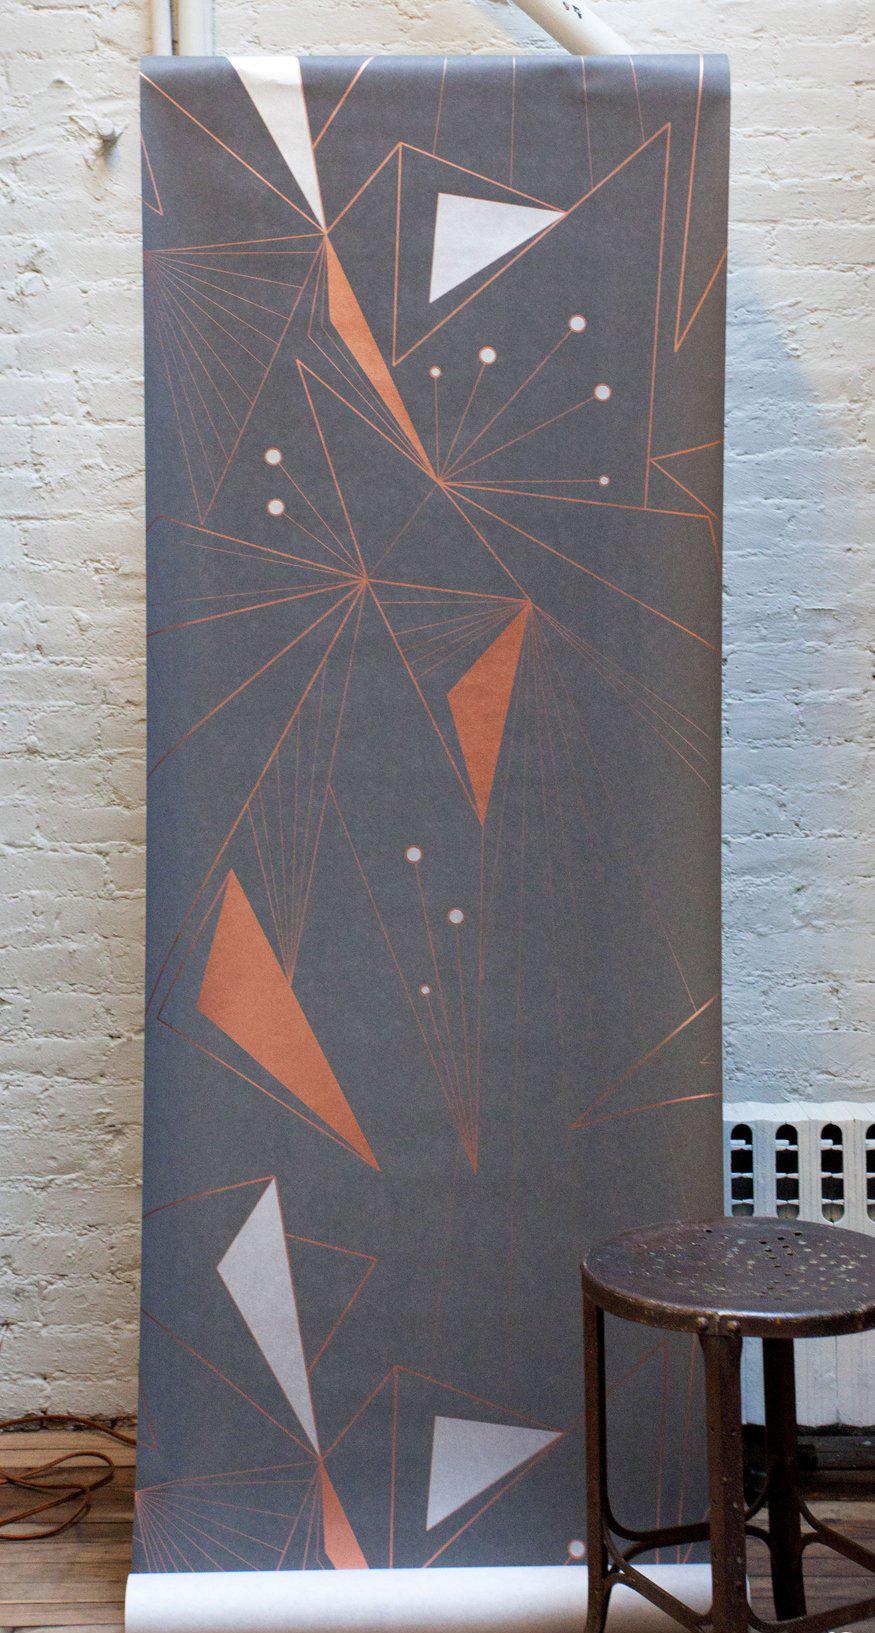 This modern, and geometric wallpaper adds graphic warmth and texture to your walls in a metallic palette of bronze/gold, copper and silver on a matte charcoal gray background. It works well with Mid-Century Modern, Hollywood Regency, Art Deco and